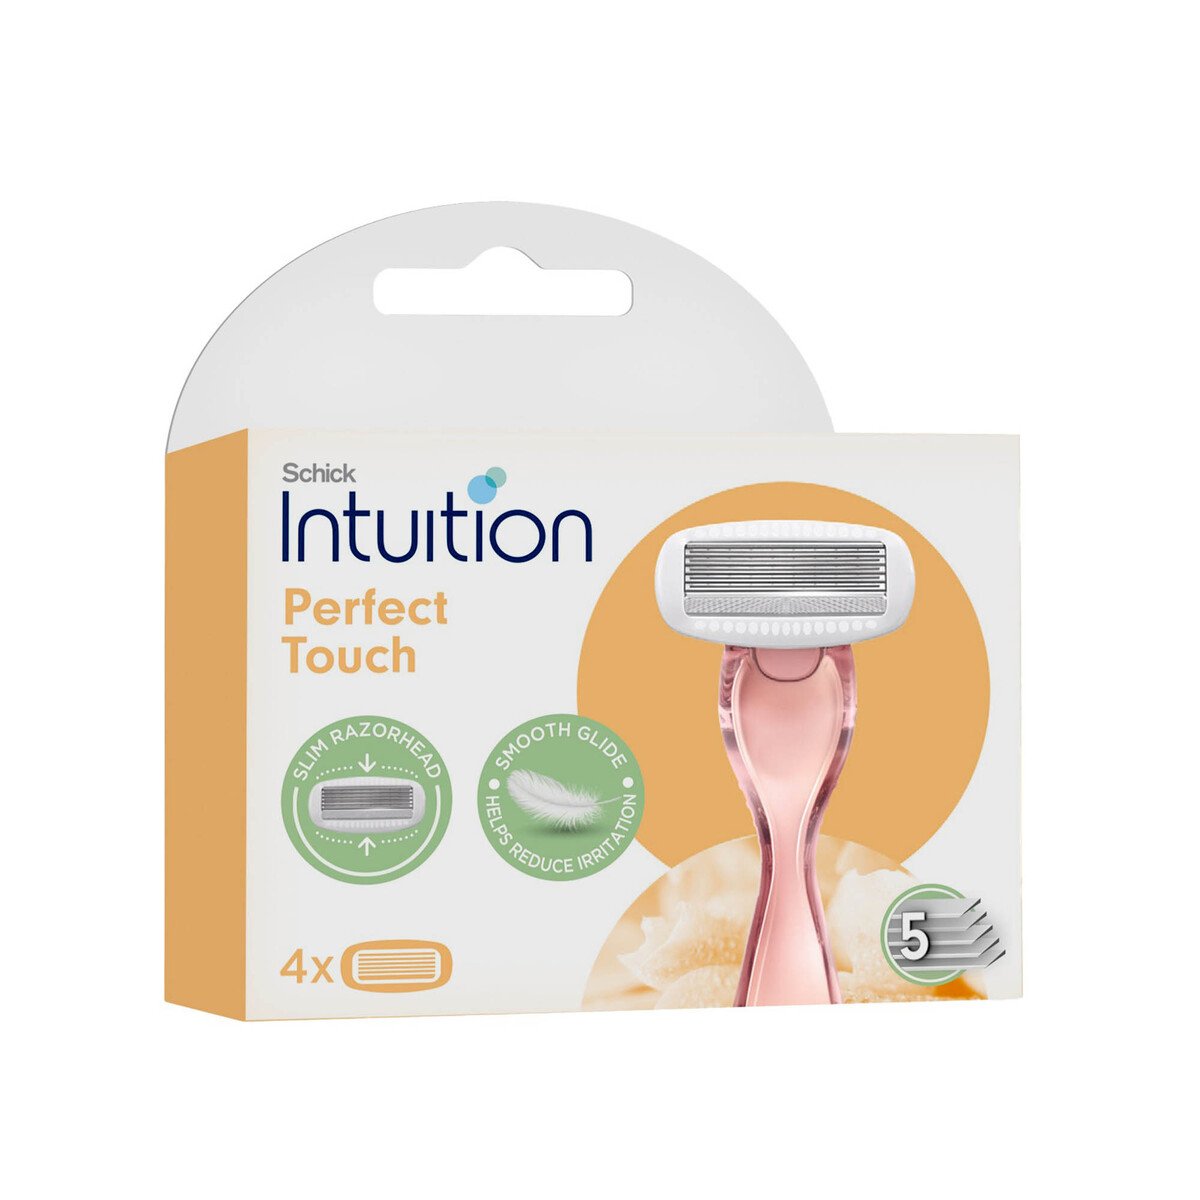 Schick Intuition Perfect Touch 4 Cartridge